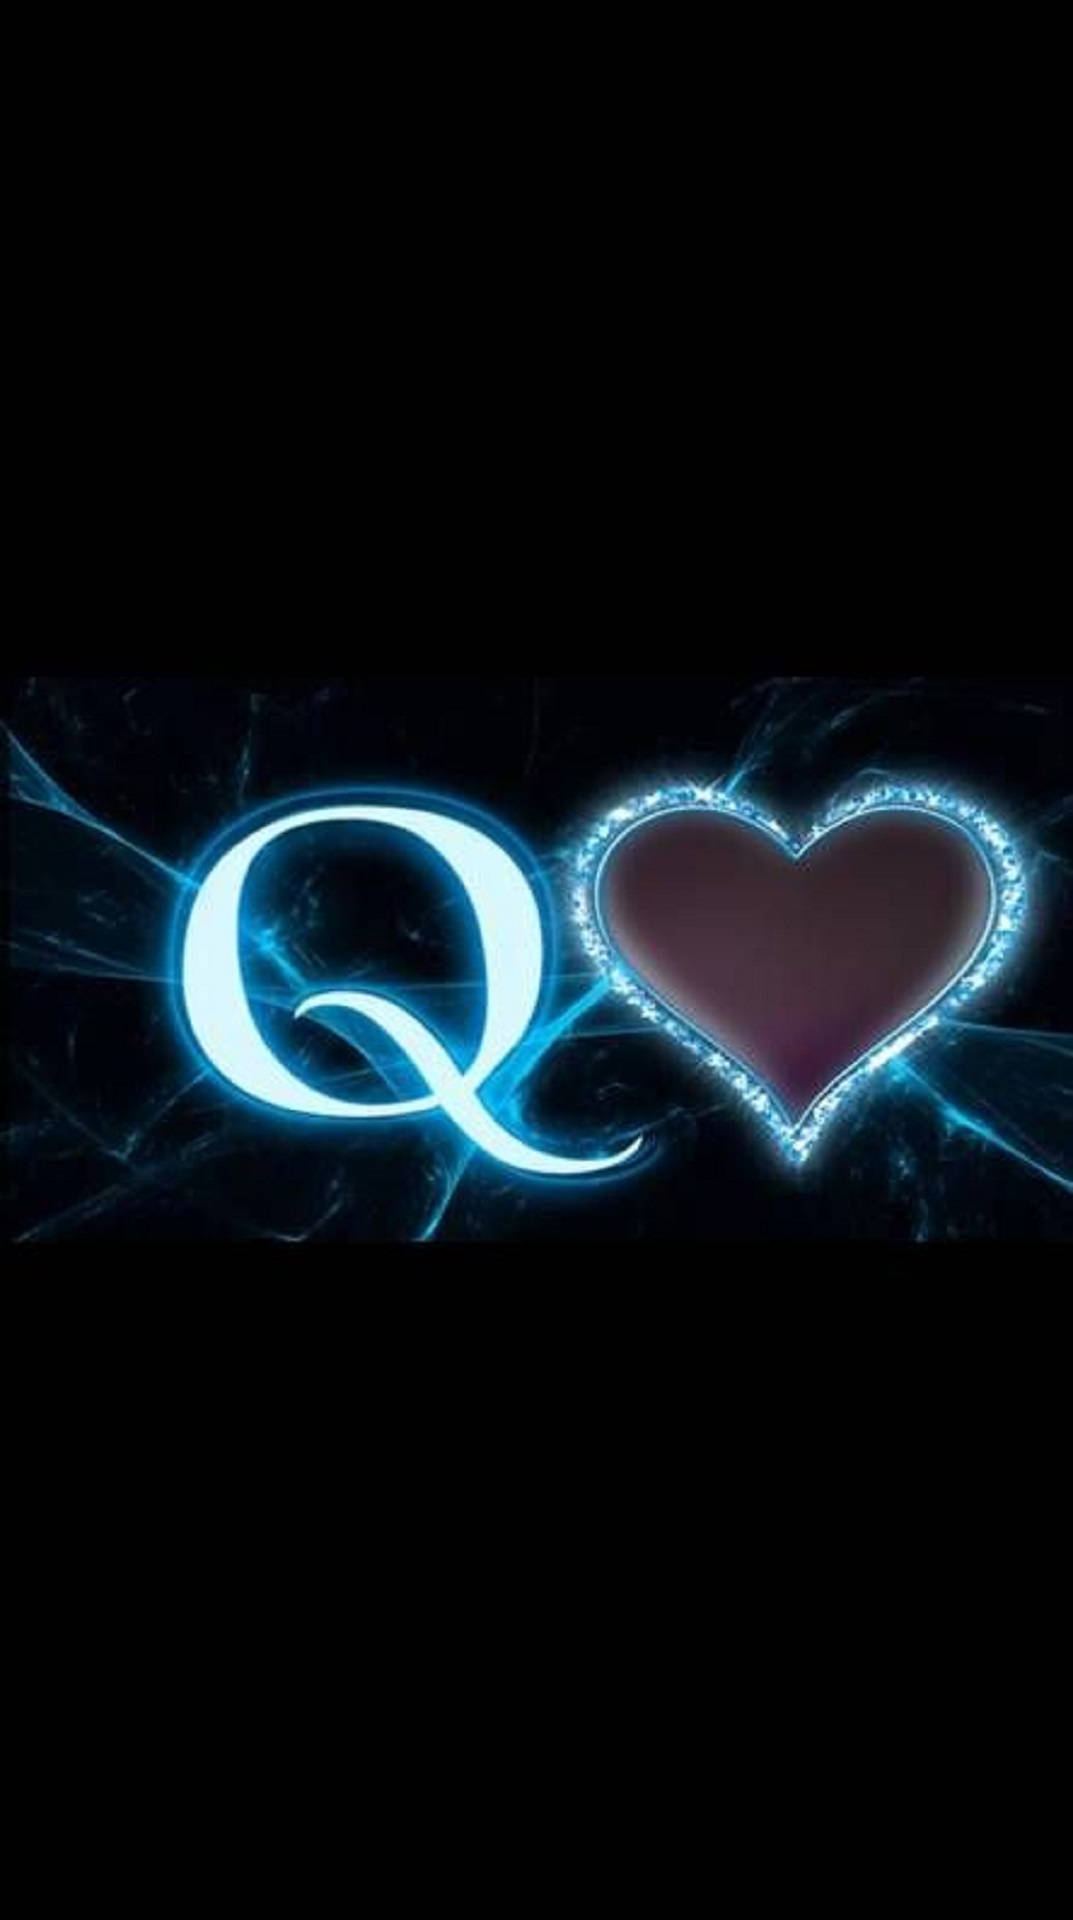 Letter Q With Blue Heart Wallpaper